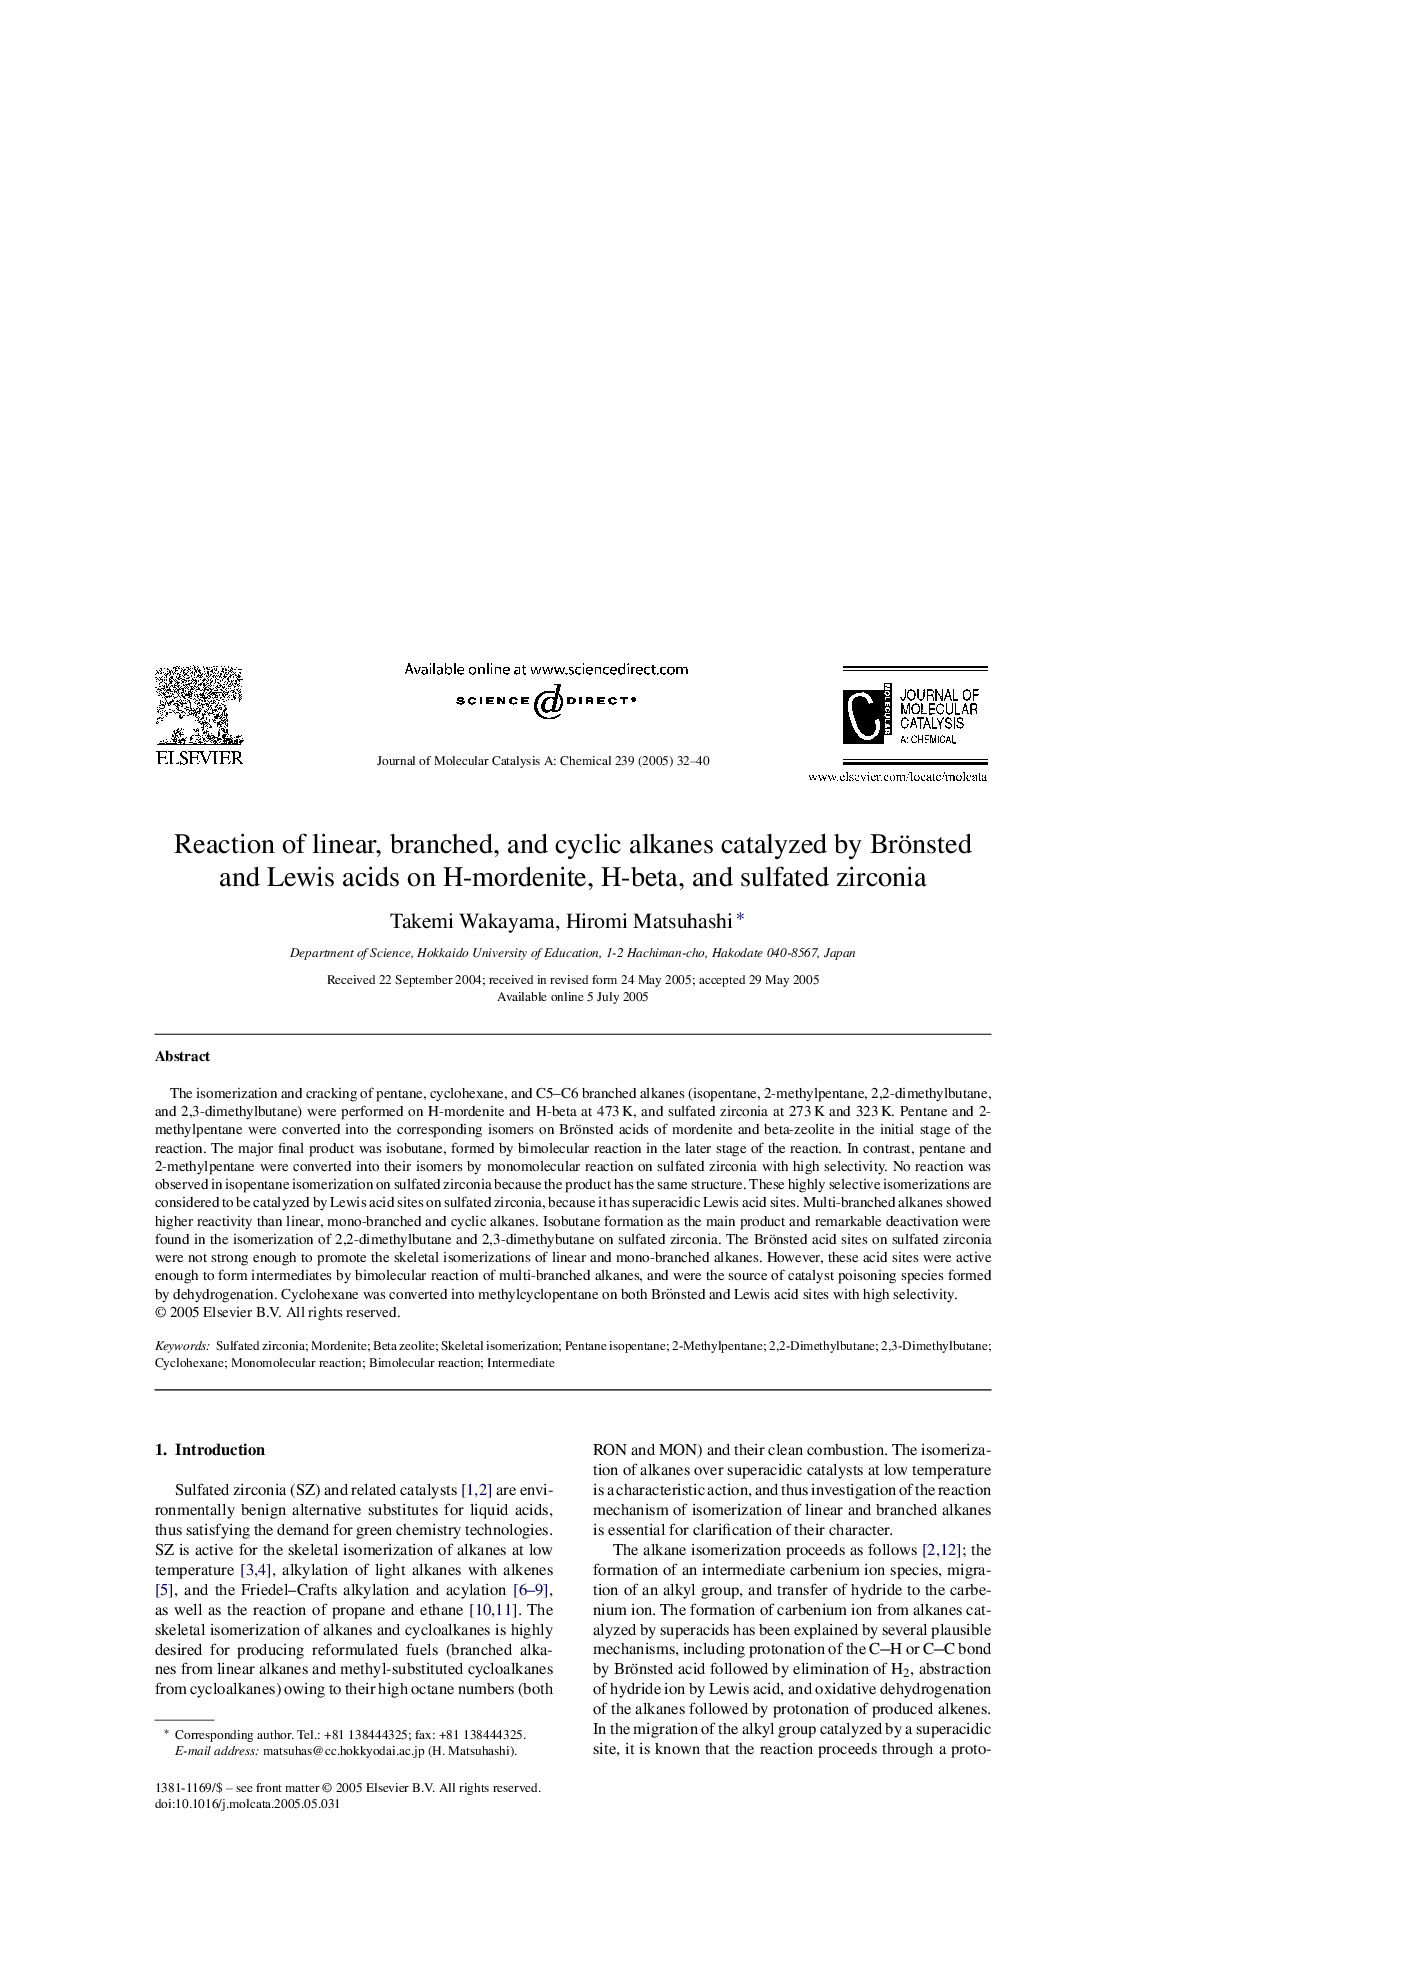 Reaction of linear, branched, and cyclic alkanes catalyzed by Brönsted and Lewis acids on H-mordenite, H-beta, and sulfated zirconia